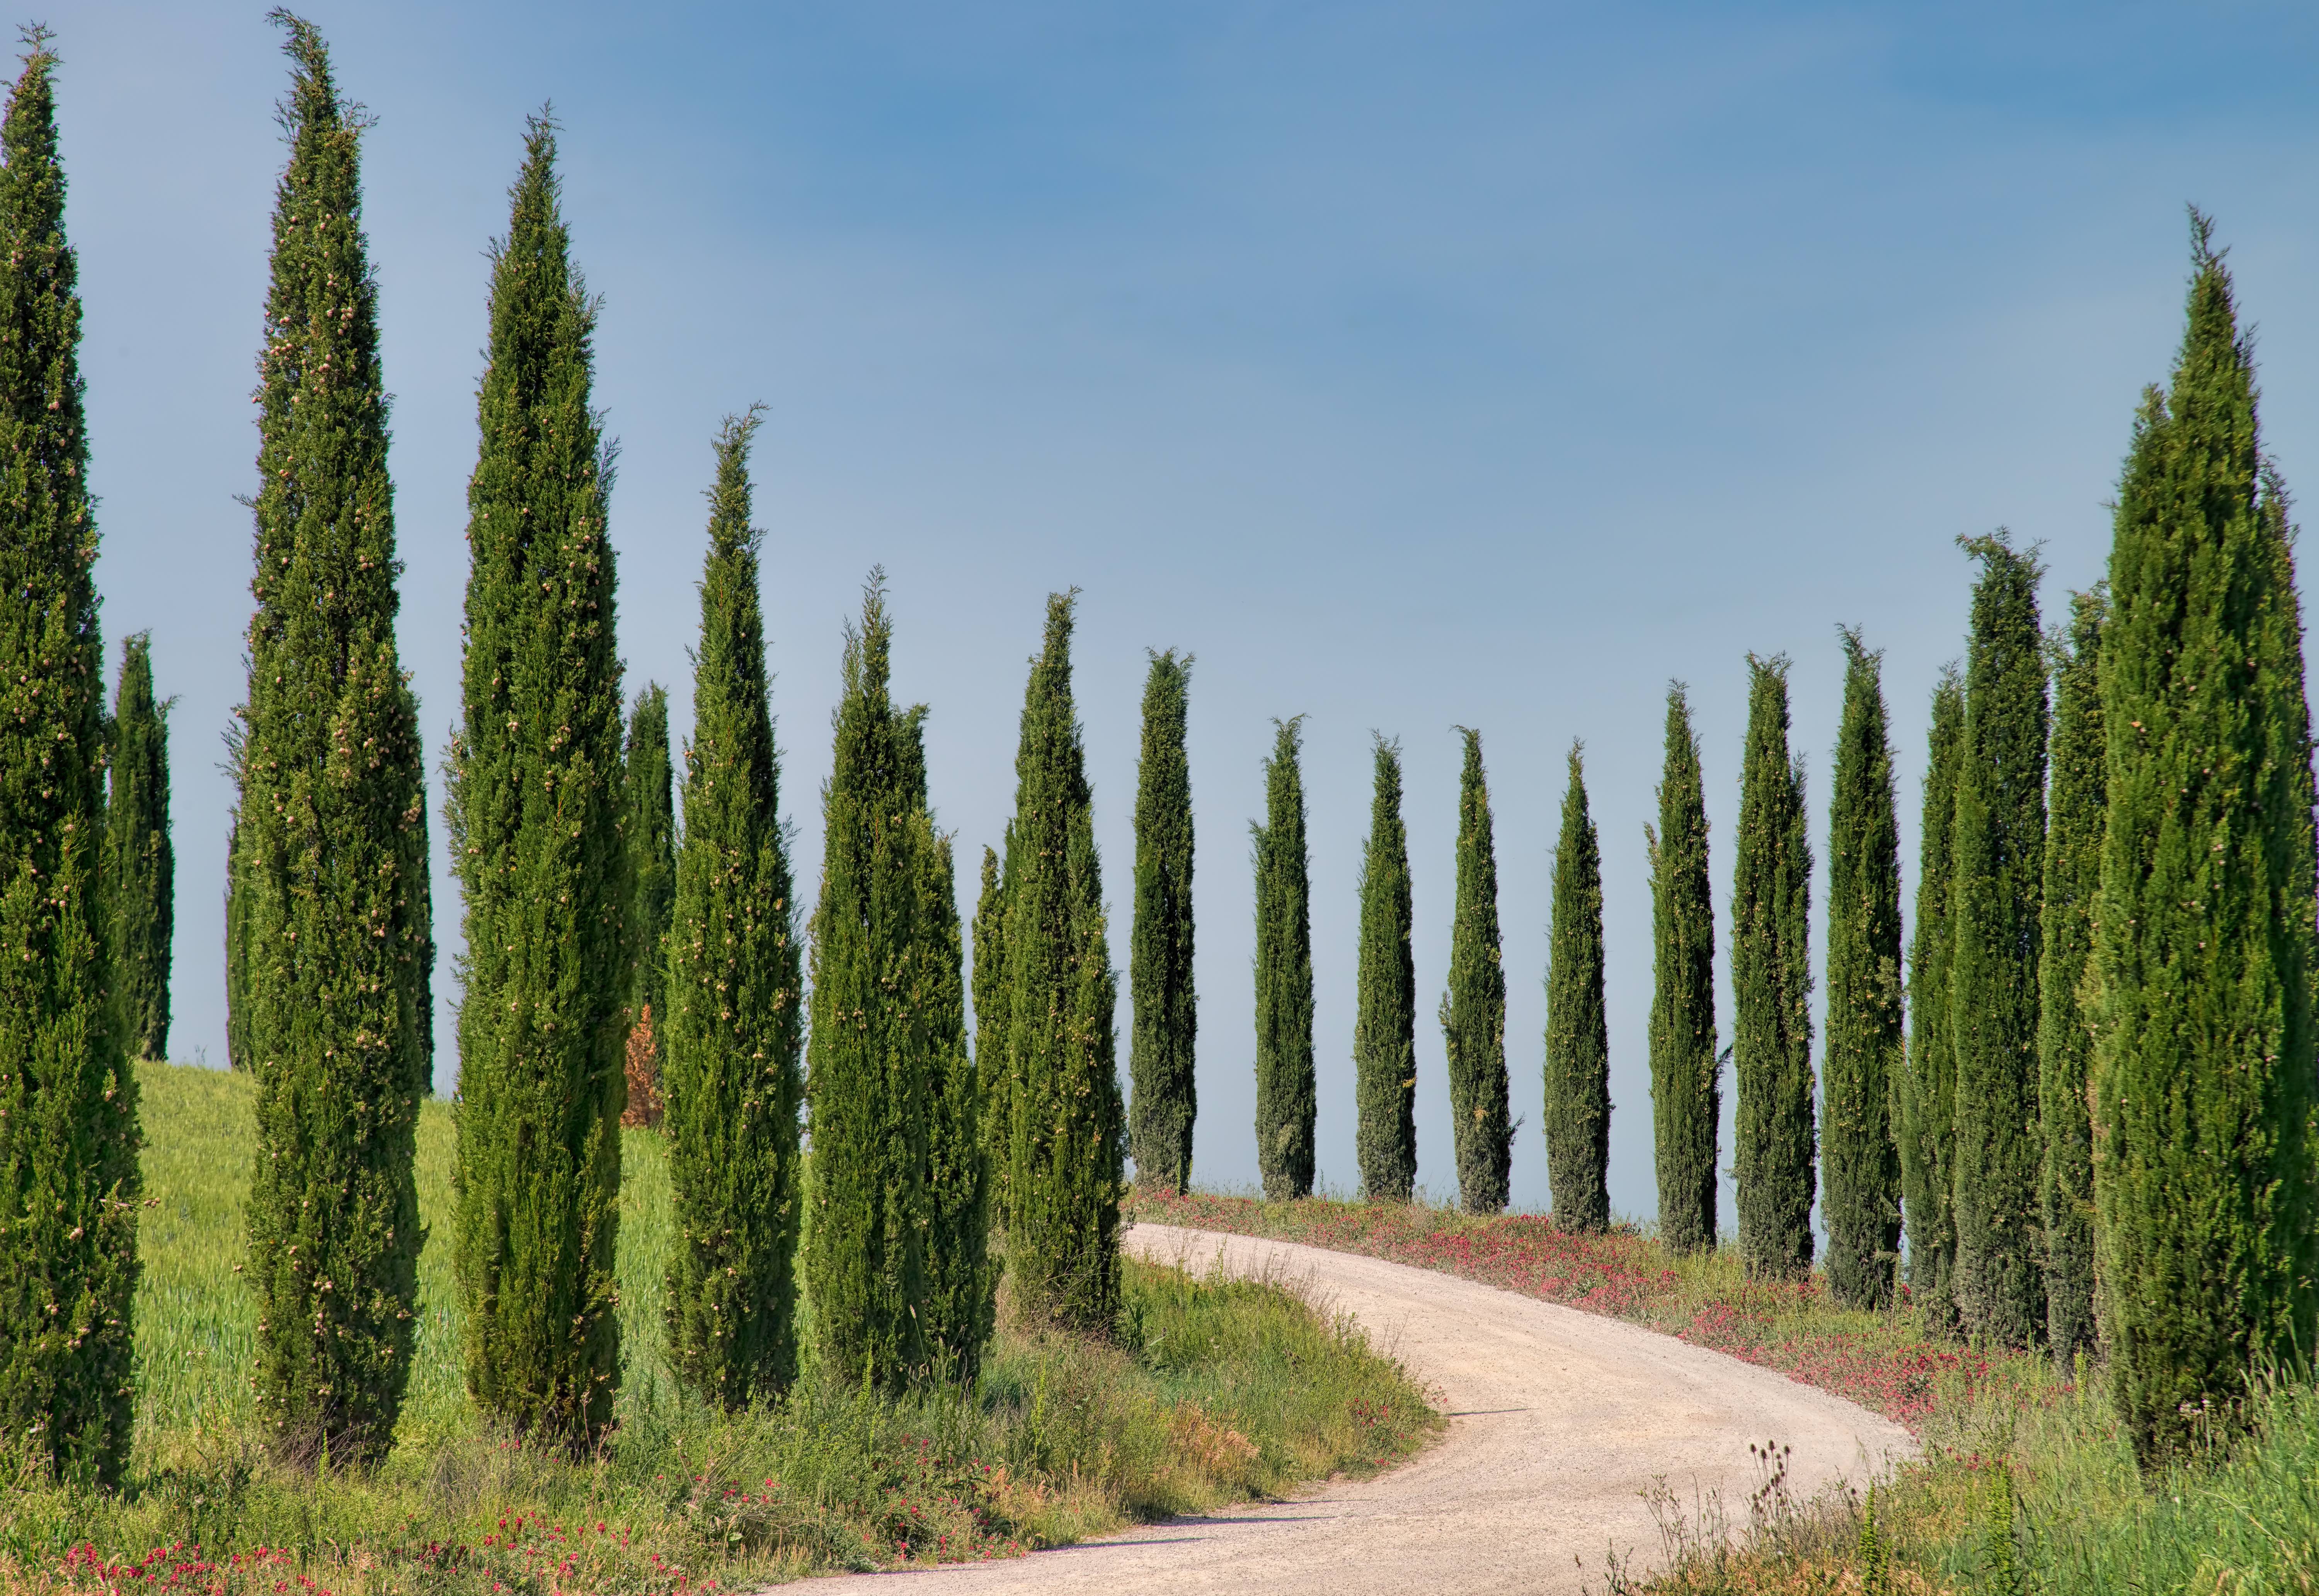 rows of cypress trees